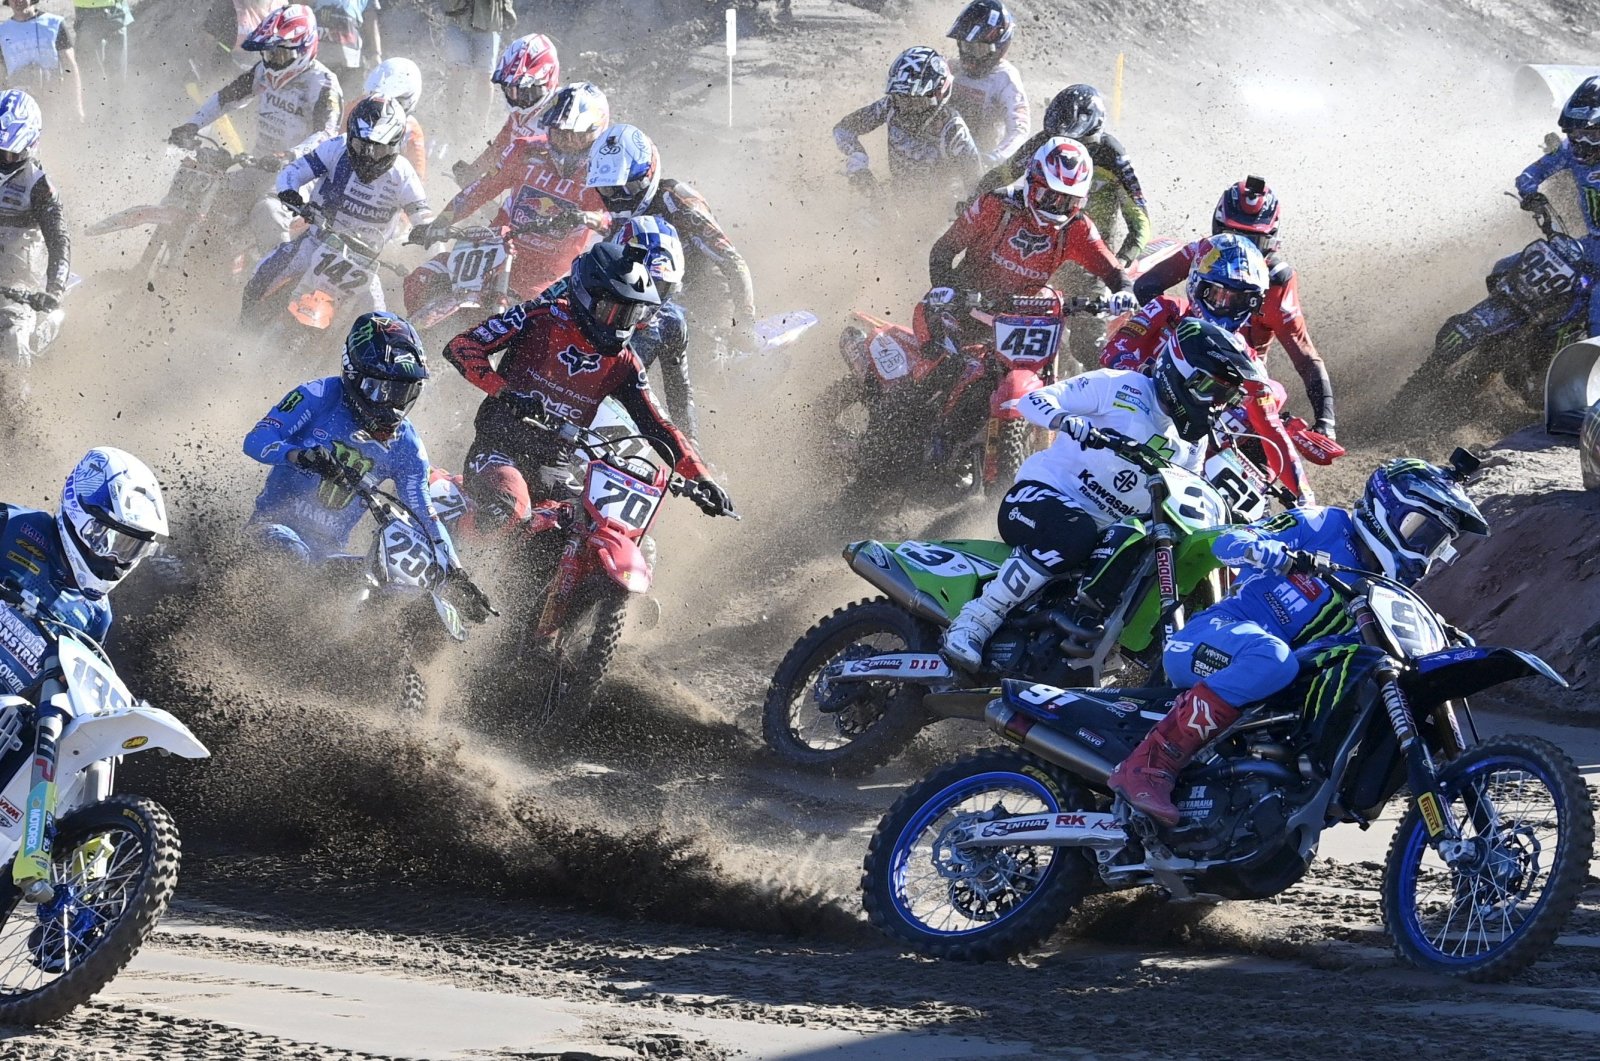 Riders compete during the start of the MXGP qualification race in Hyvinka, Finland, Aug 13, 2022. (AFP Photo)